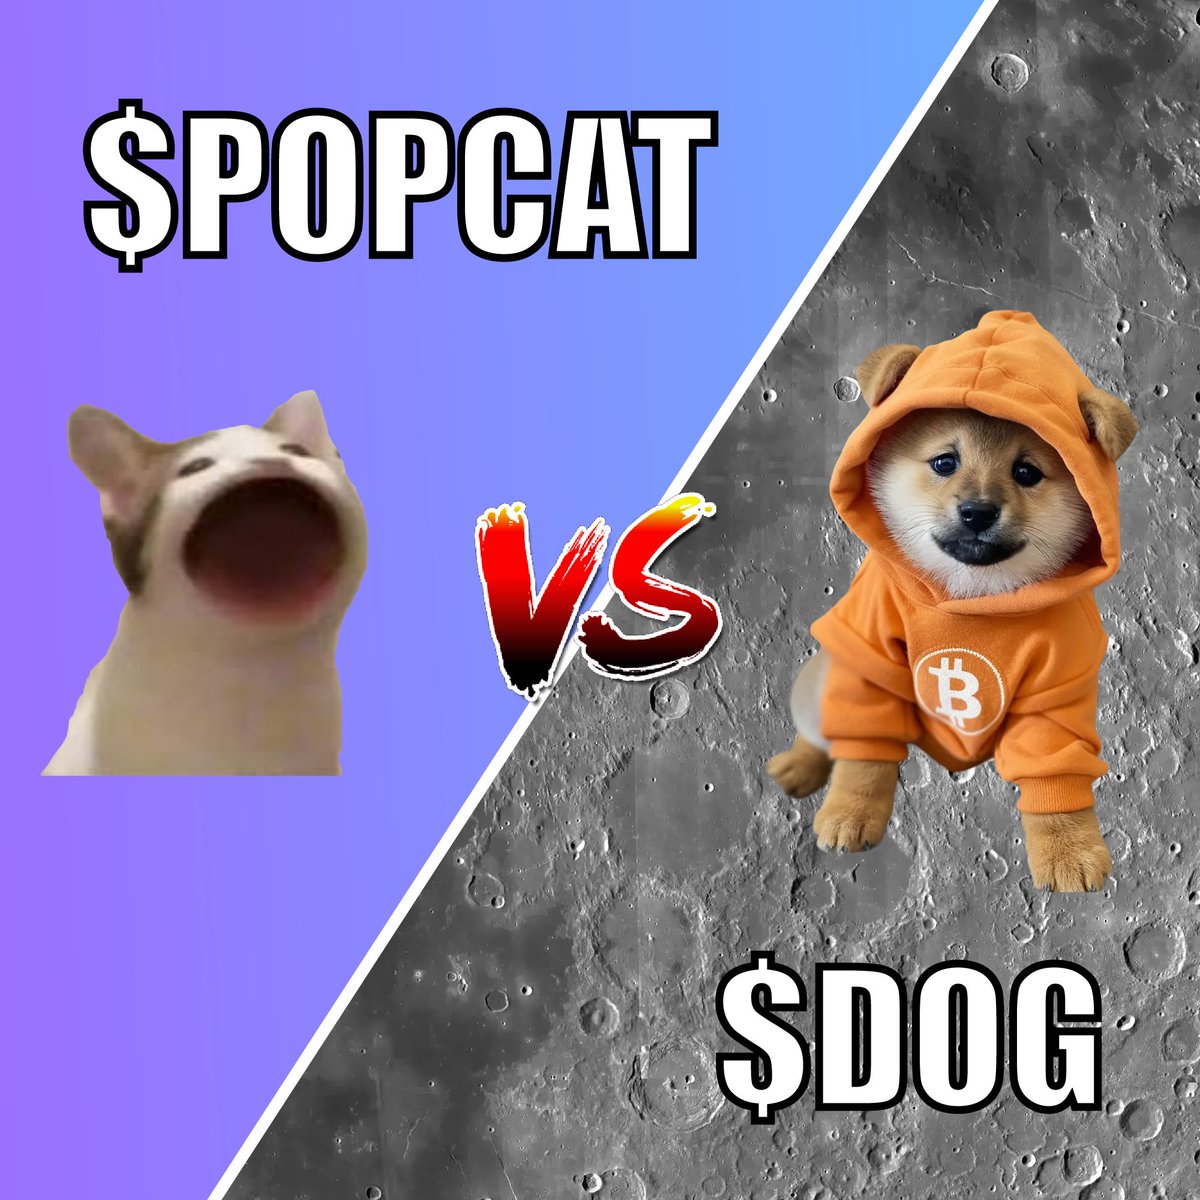 I HEREBY CHALLENGE $POPCAT TO A ONE WEEK CAT VS DOG FIGHT WHERE @BINANCE MUST LIST THE WINNER IT IS COMPLETELY UNACCEPTABLE THAT A FRIGGIN CAT COIN ON A TINY TESTNET CHAIN HAS A HIGHER MARKET CAP THAN $DOG ON THE DADDY CHAIN A FRIGGIN CAT IS BEATING US SOLANA MUST BEND THE KNEE